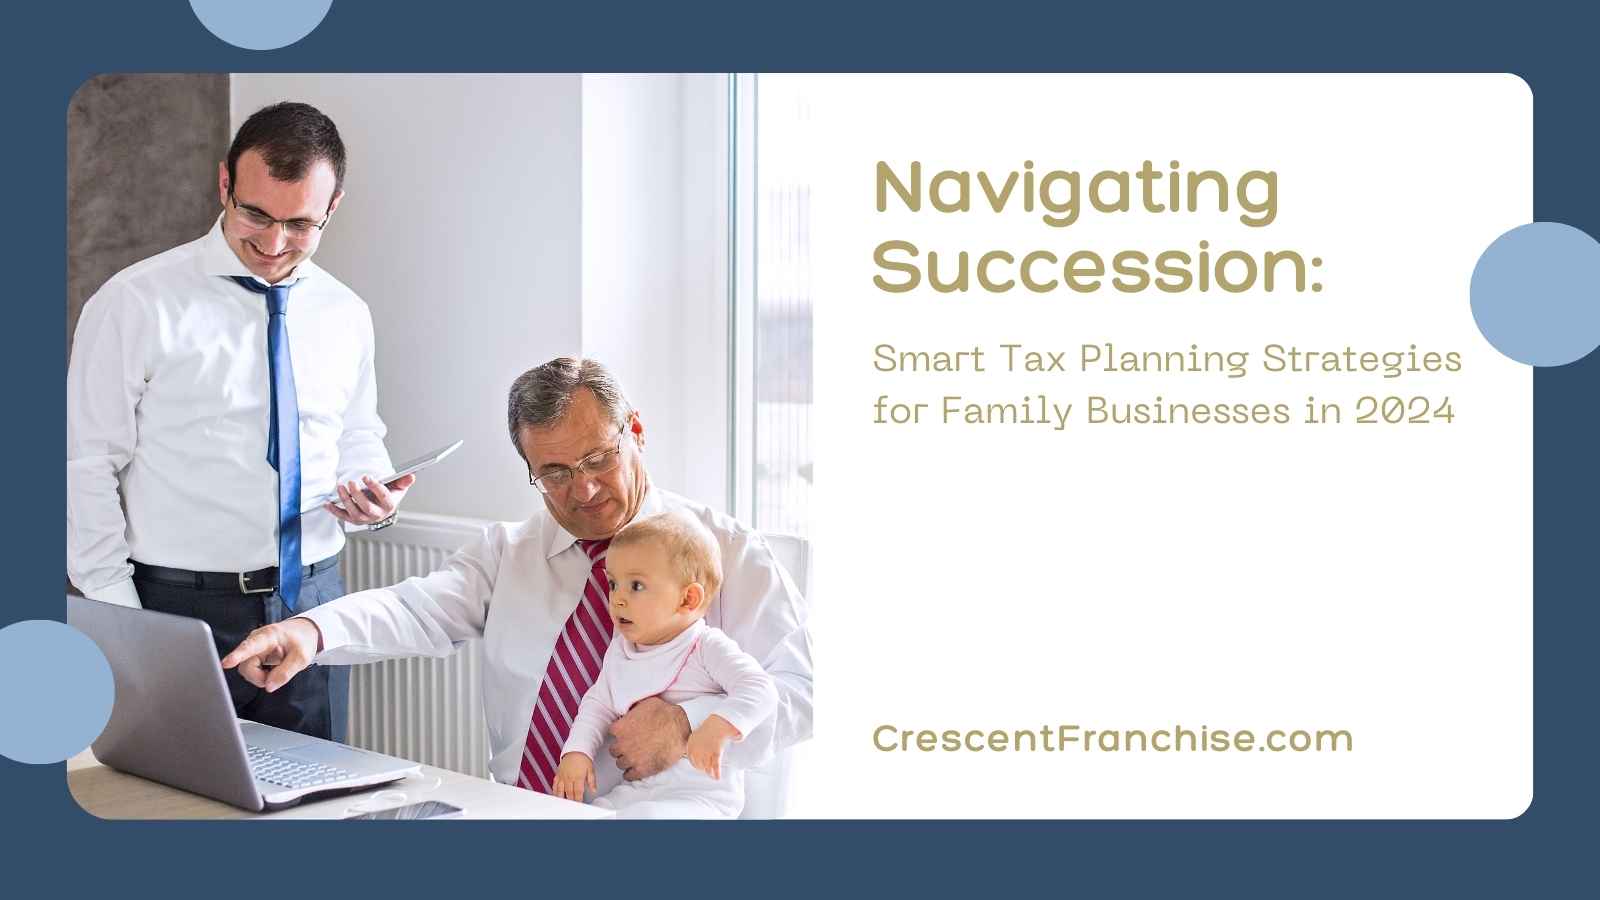 Navigating Succession: Smart Tax Planning Strategies for Family Businesses in 2024